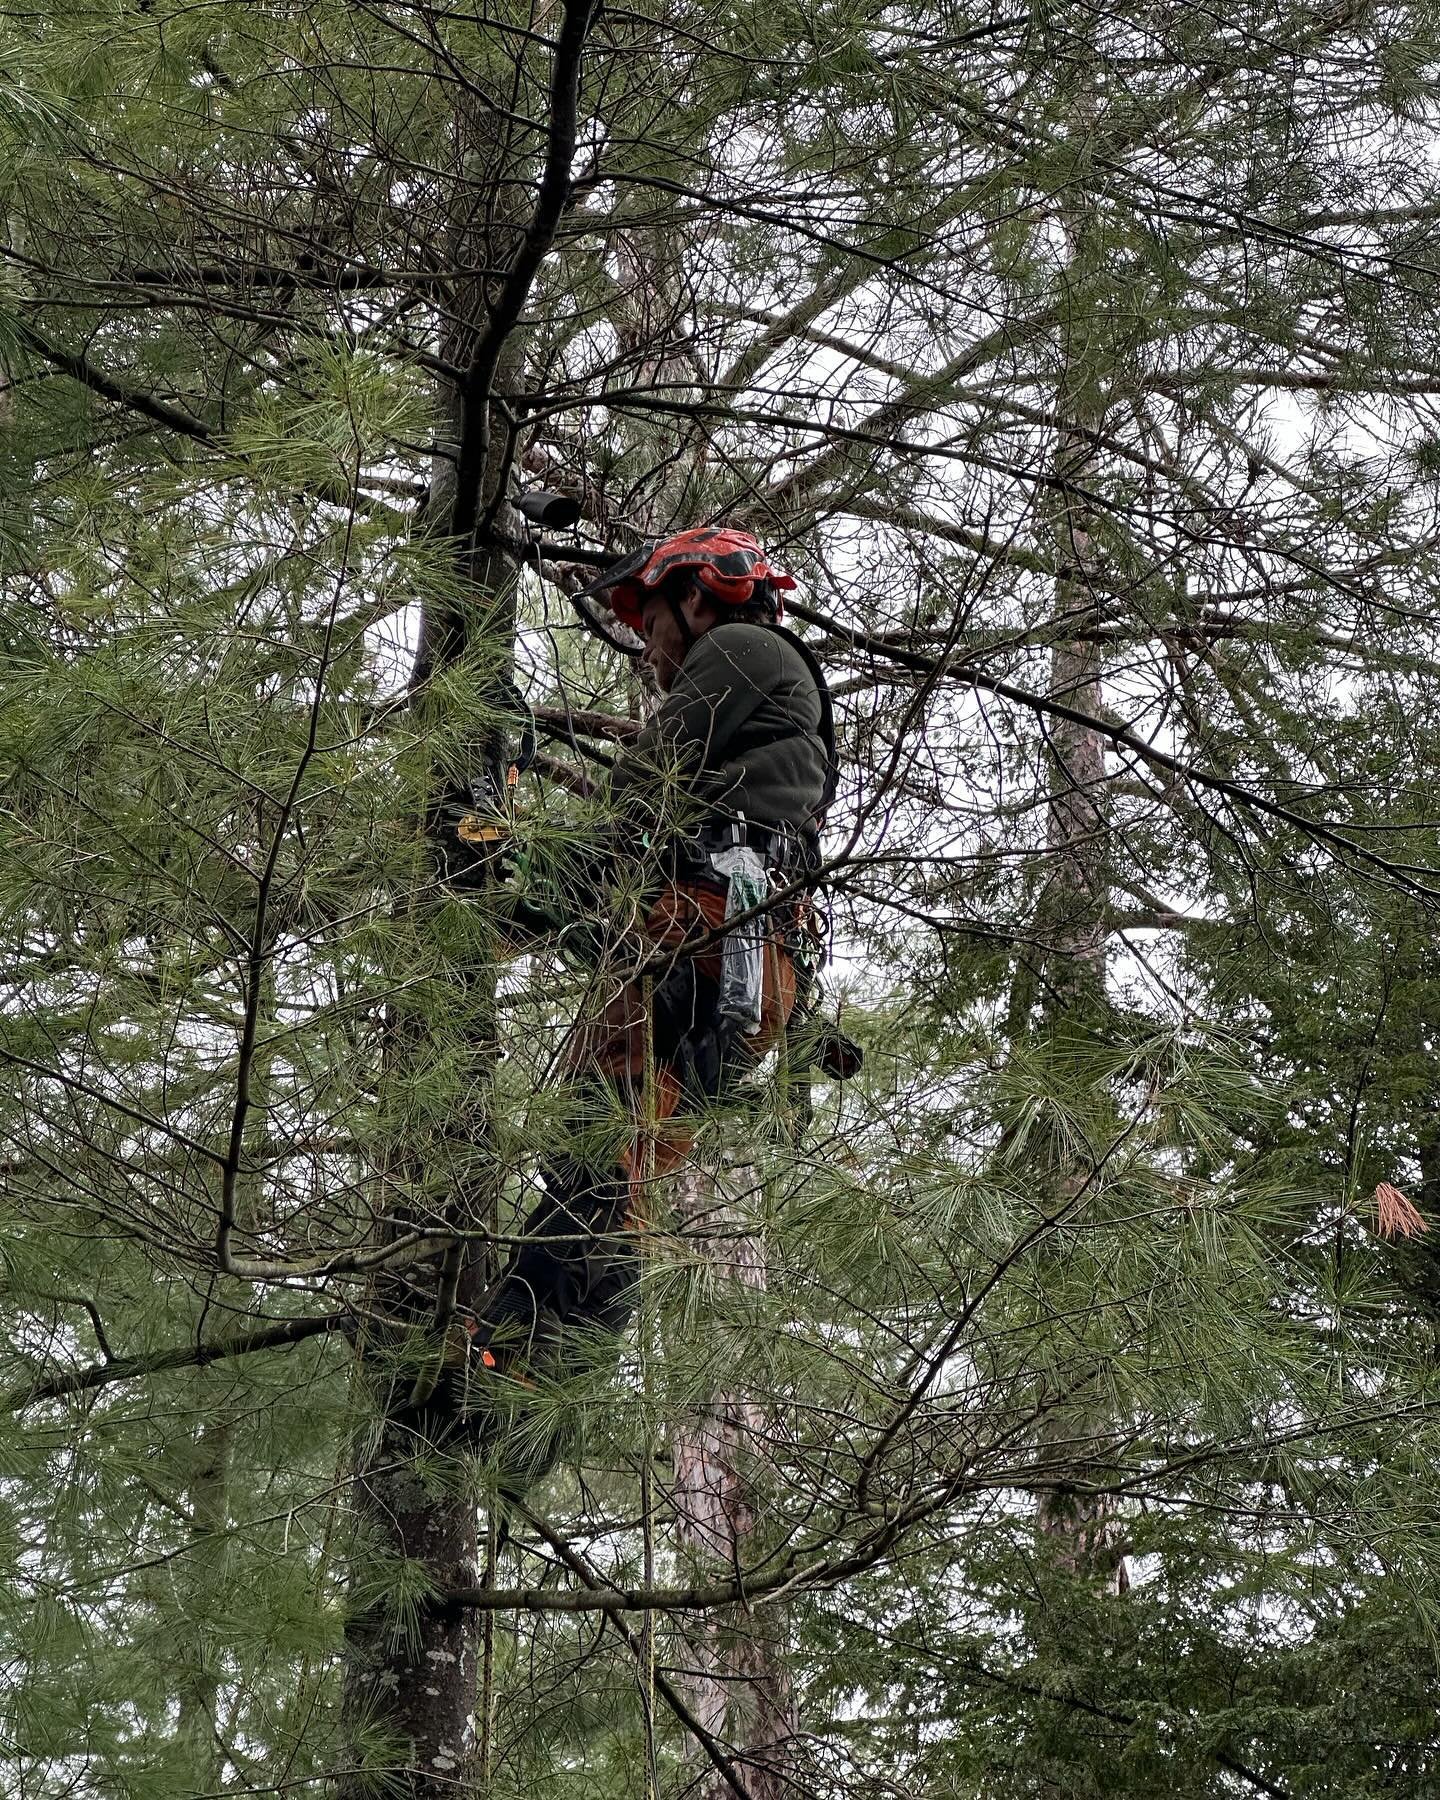 Twilight magic in the woods! 🌲✨ Our arborist hanging from this majestic white pine, installing downlighting to softly guide your steps along the natural granite pathway. Nature&rsquo;s beauty, gently illuminated. #NatureLight #ArboristAdventures #Tw